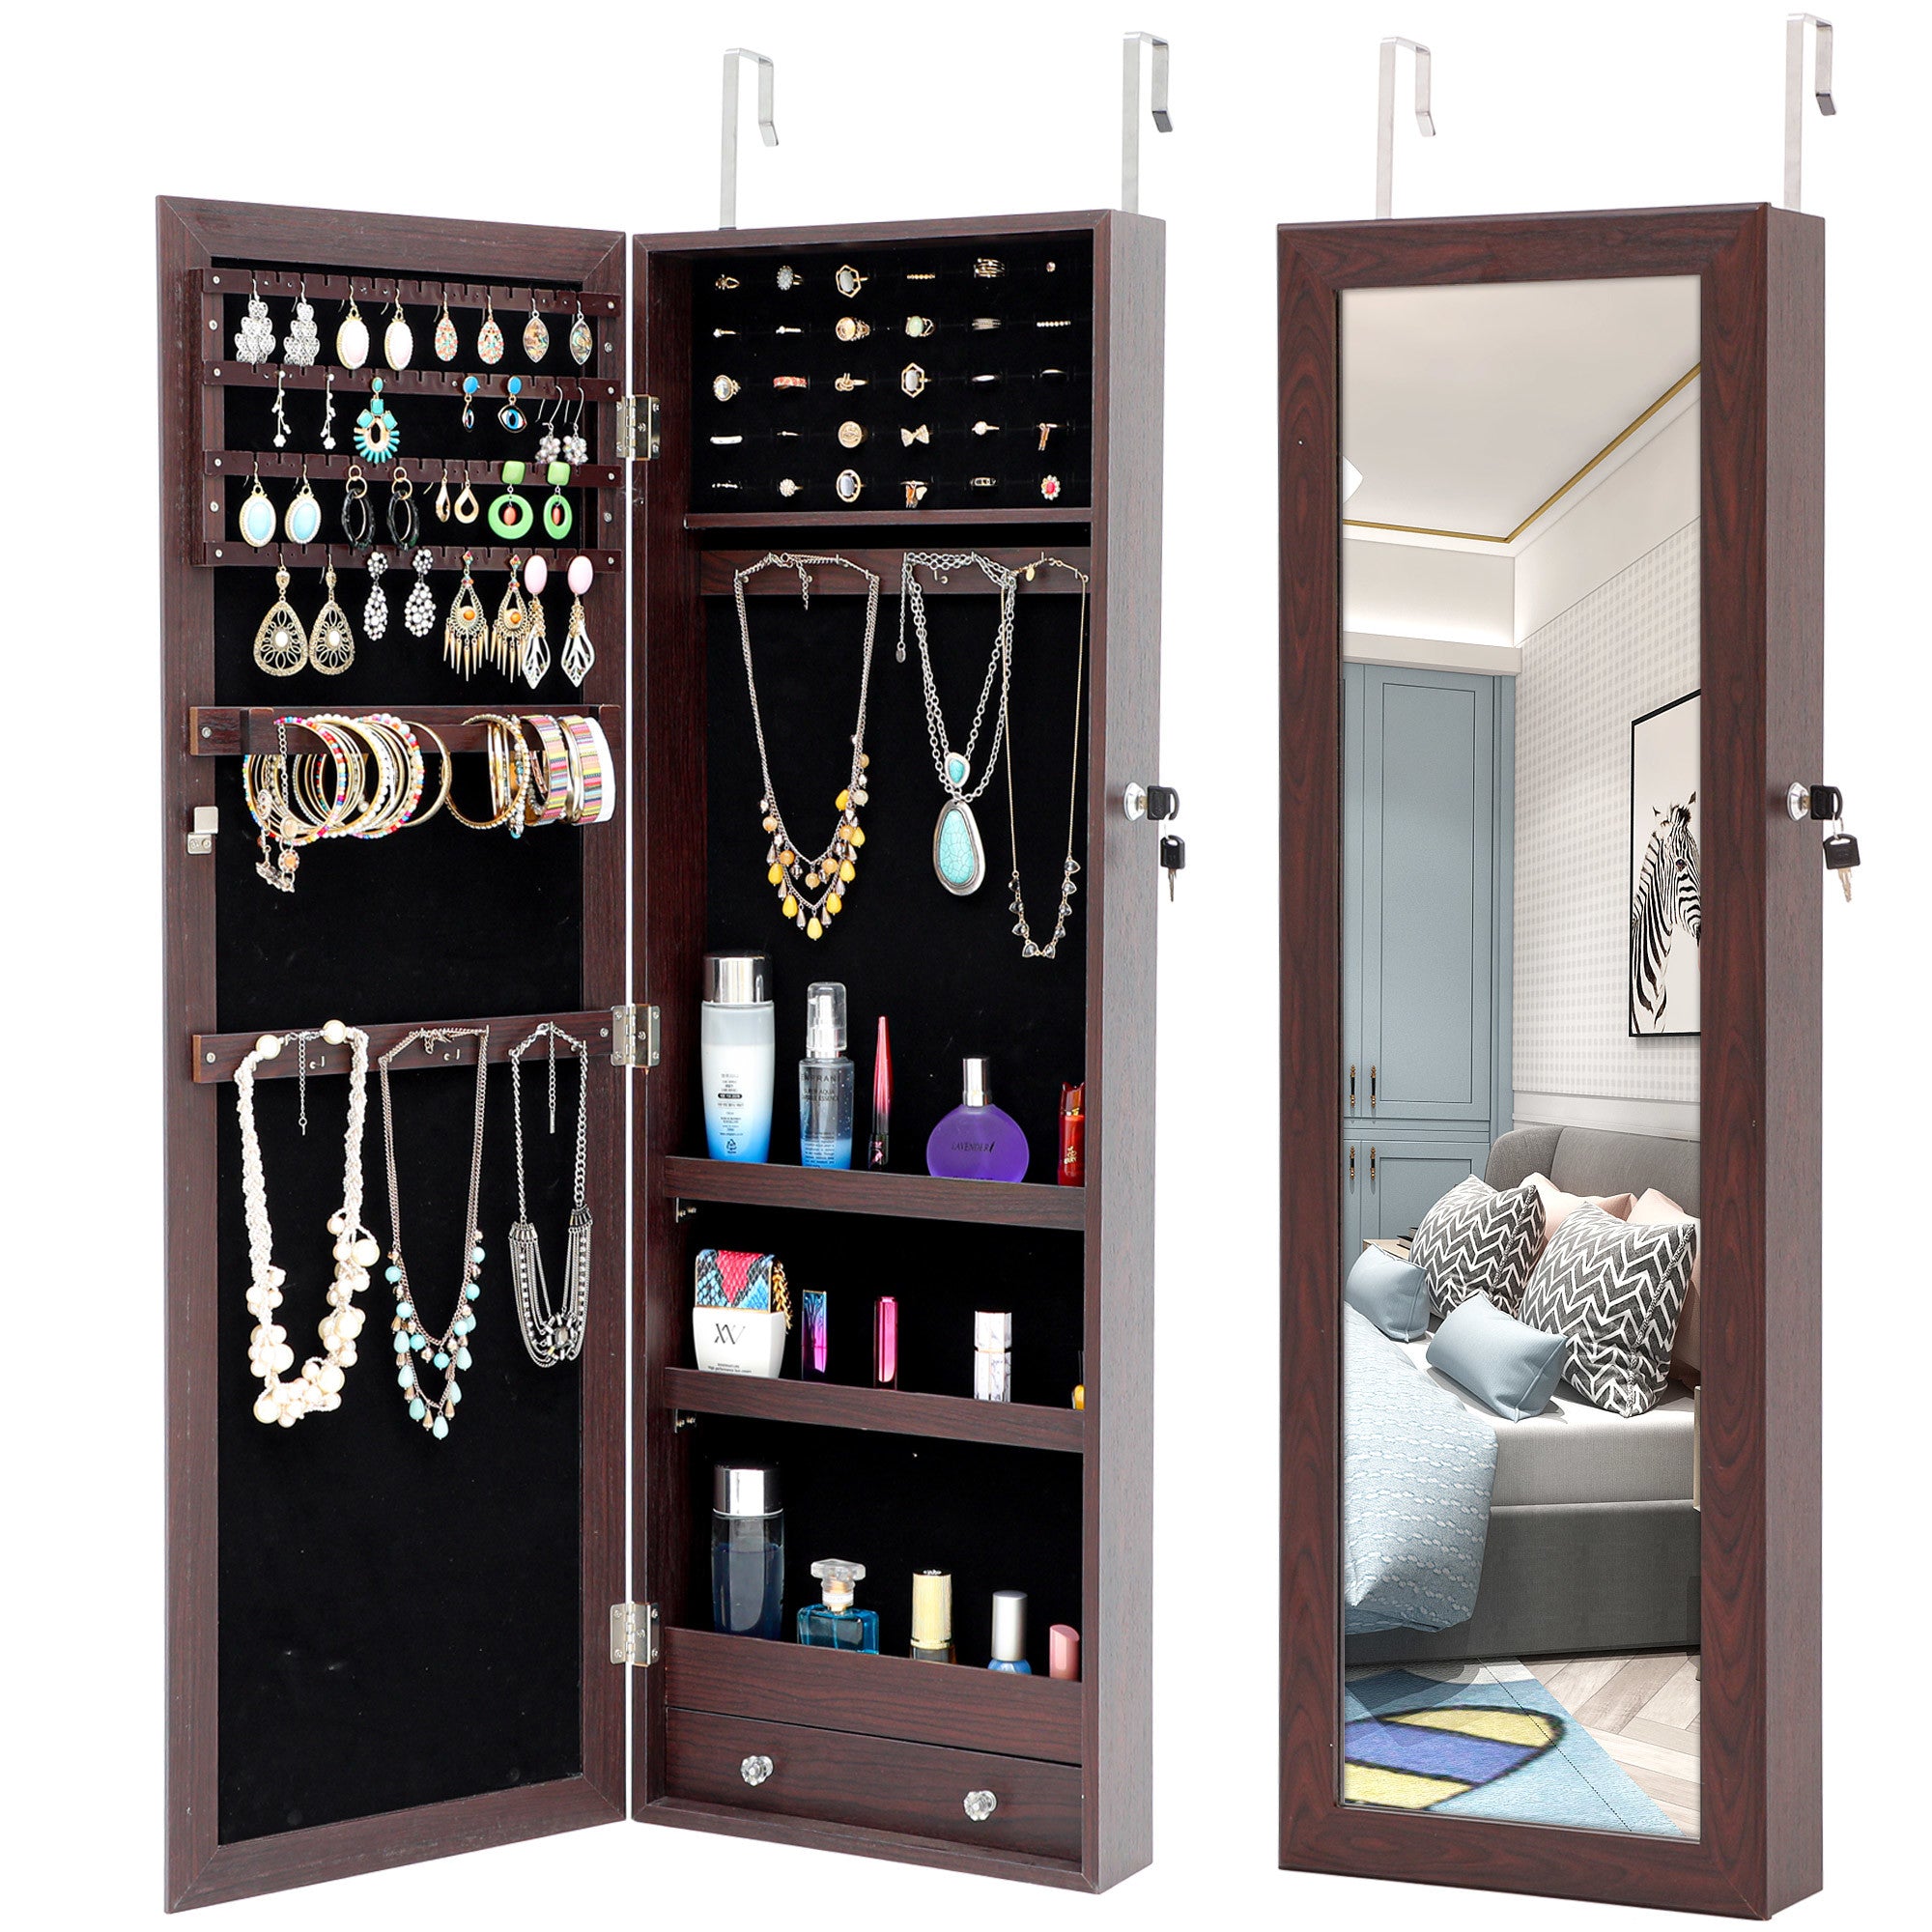 Free shipping Fashionable and contracted jewelry receives mirror ark to be able to hang on the door or wall